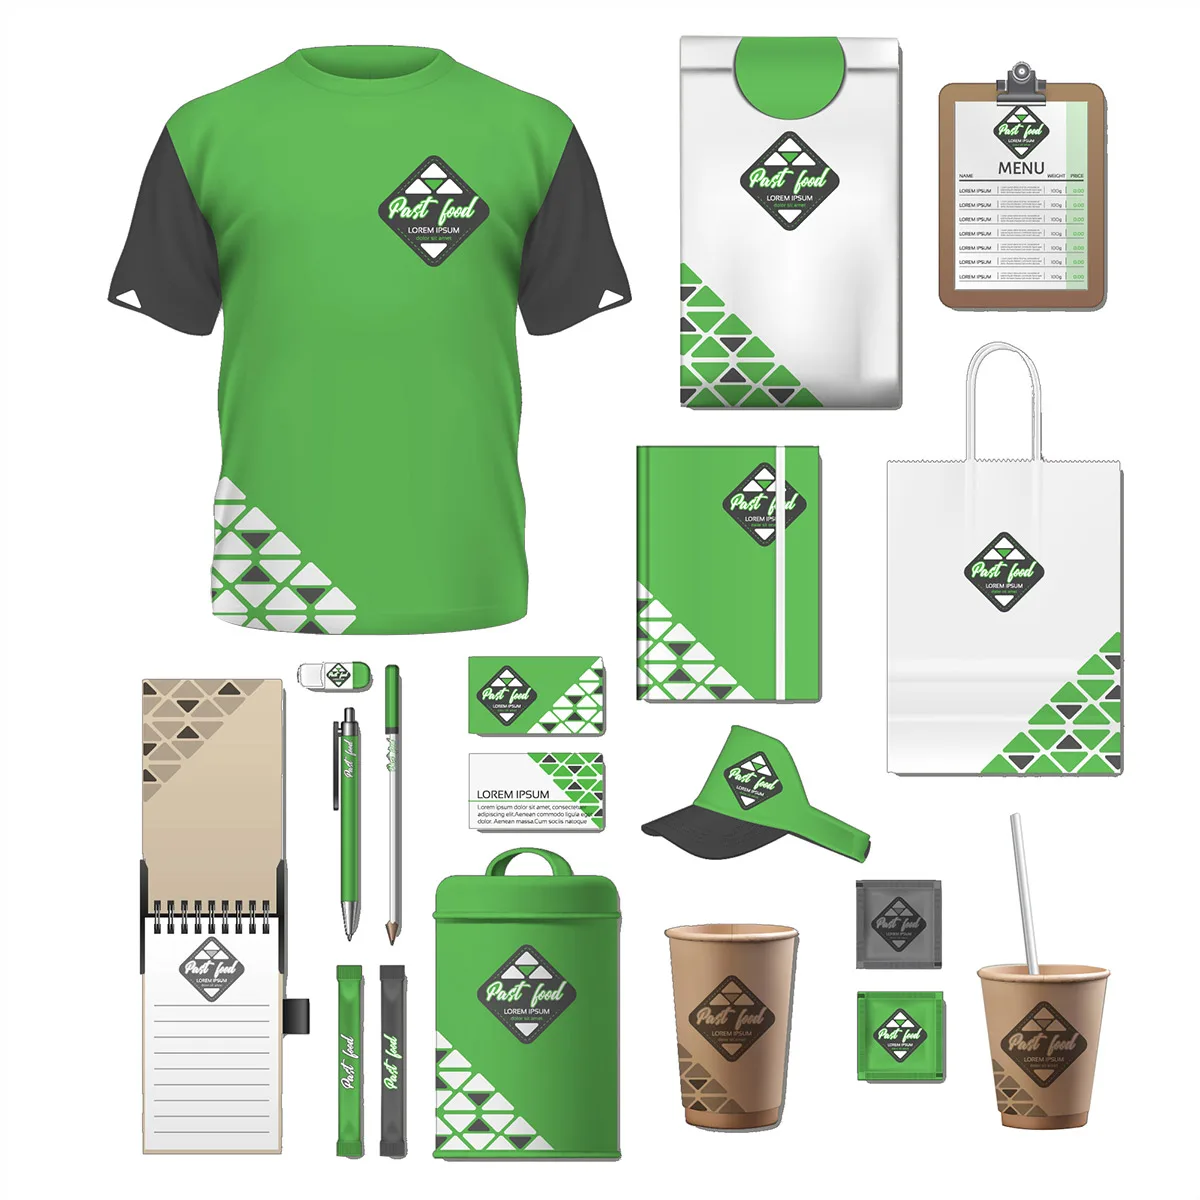 Promotional Gifts,Promotional Gifts With Logo,Promotional Items - Buy ...